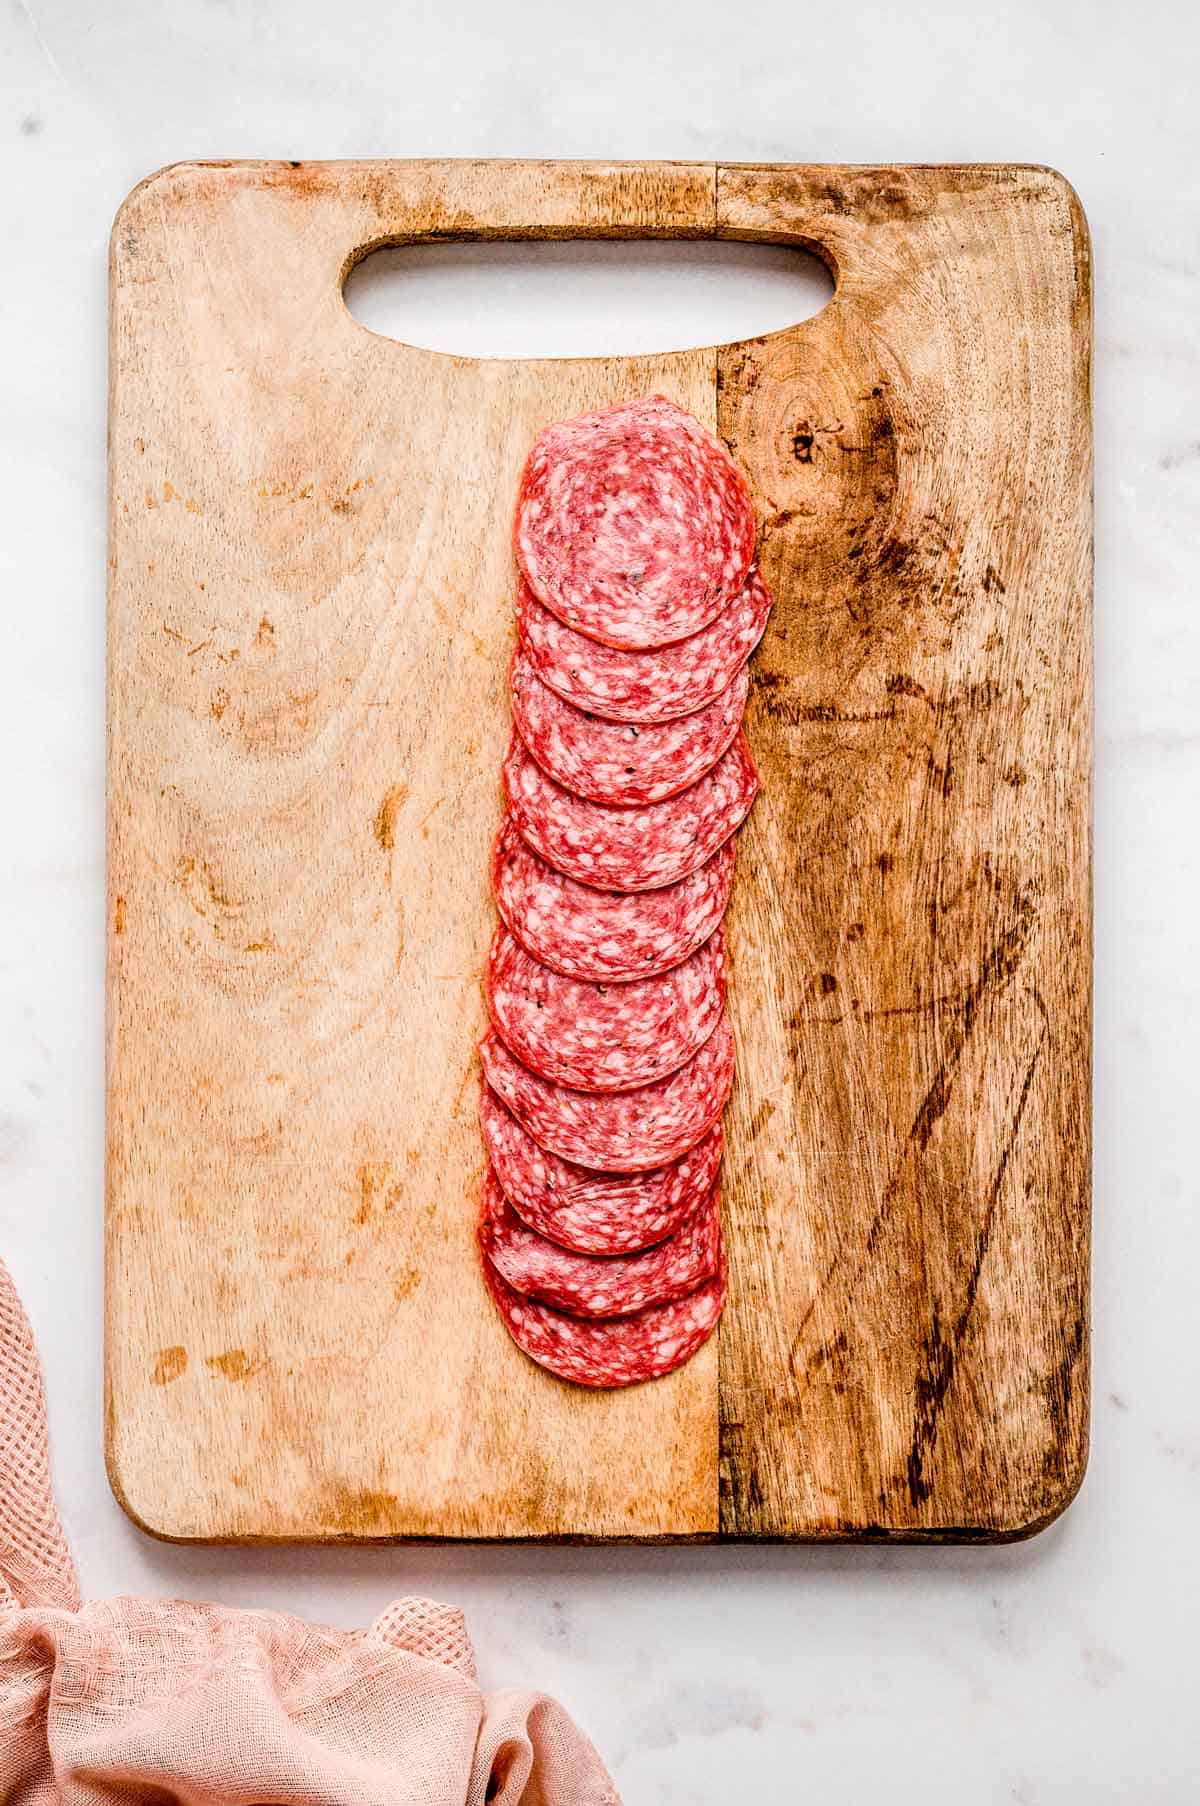 Salami slices on a wooden cutting board.